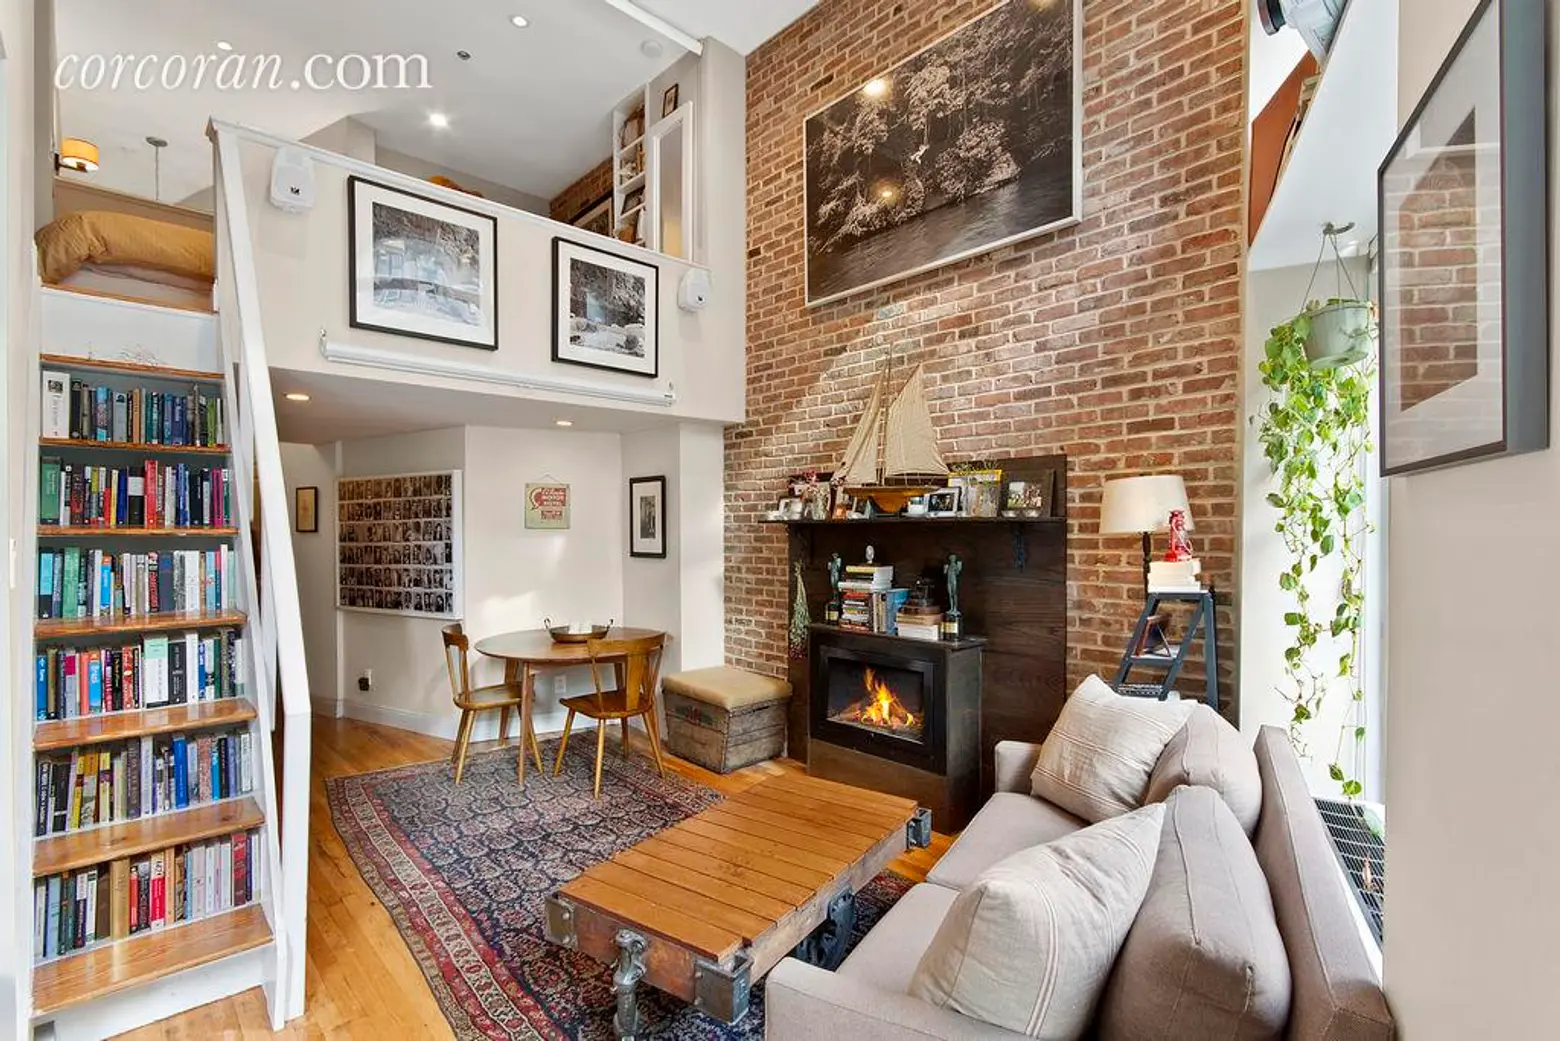 Actor Chris Lowell Sells Double-Height Greenwich Village Loft for $1M